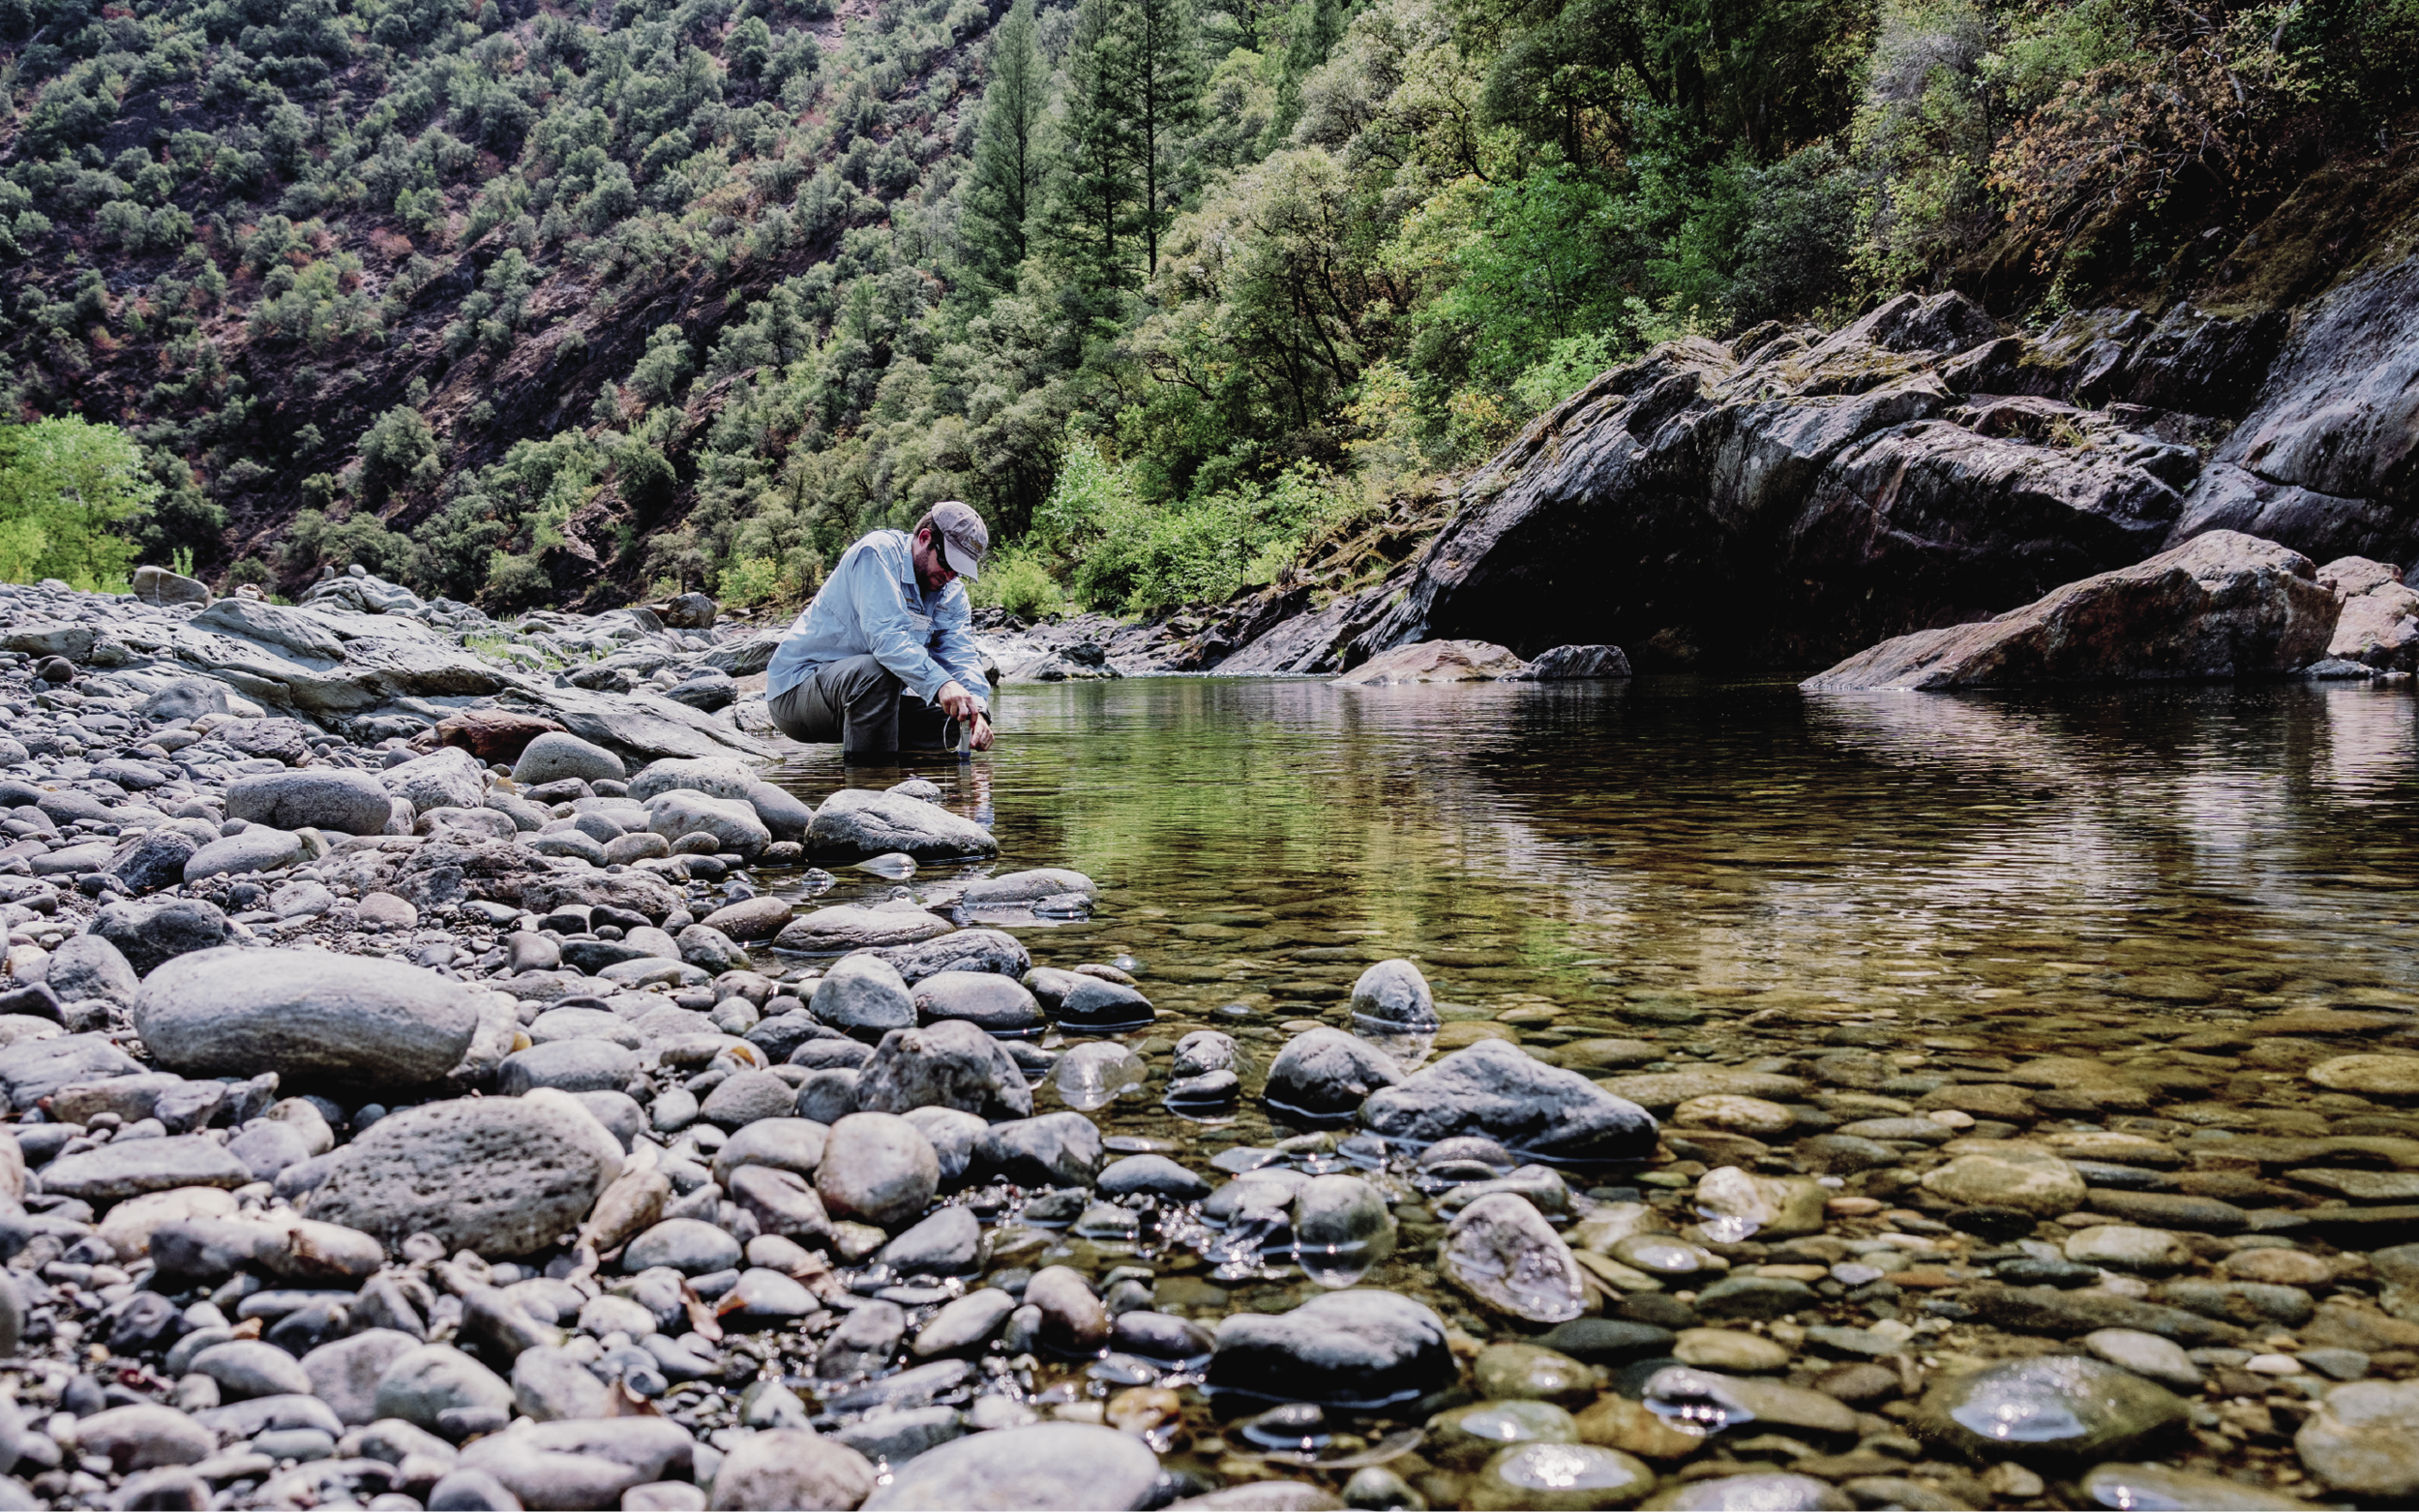 Ryan Peek is wearing a blue shirt and kneeling down next to a rocky river.